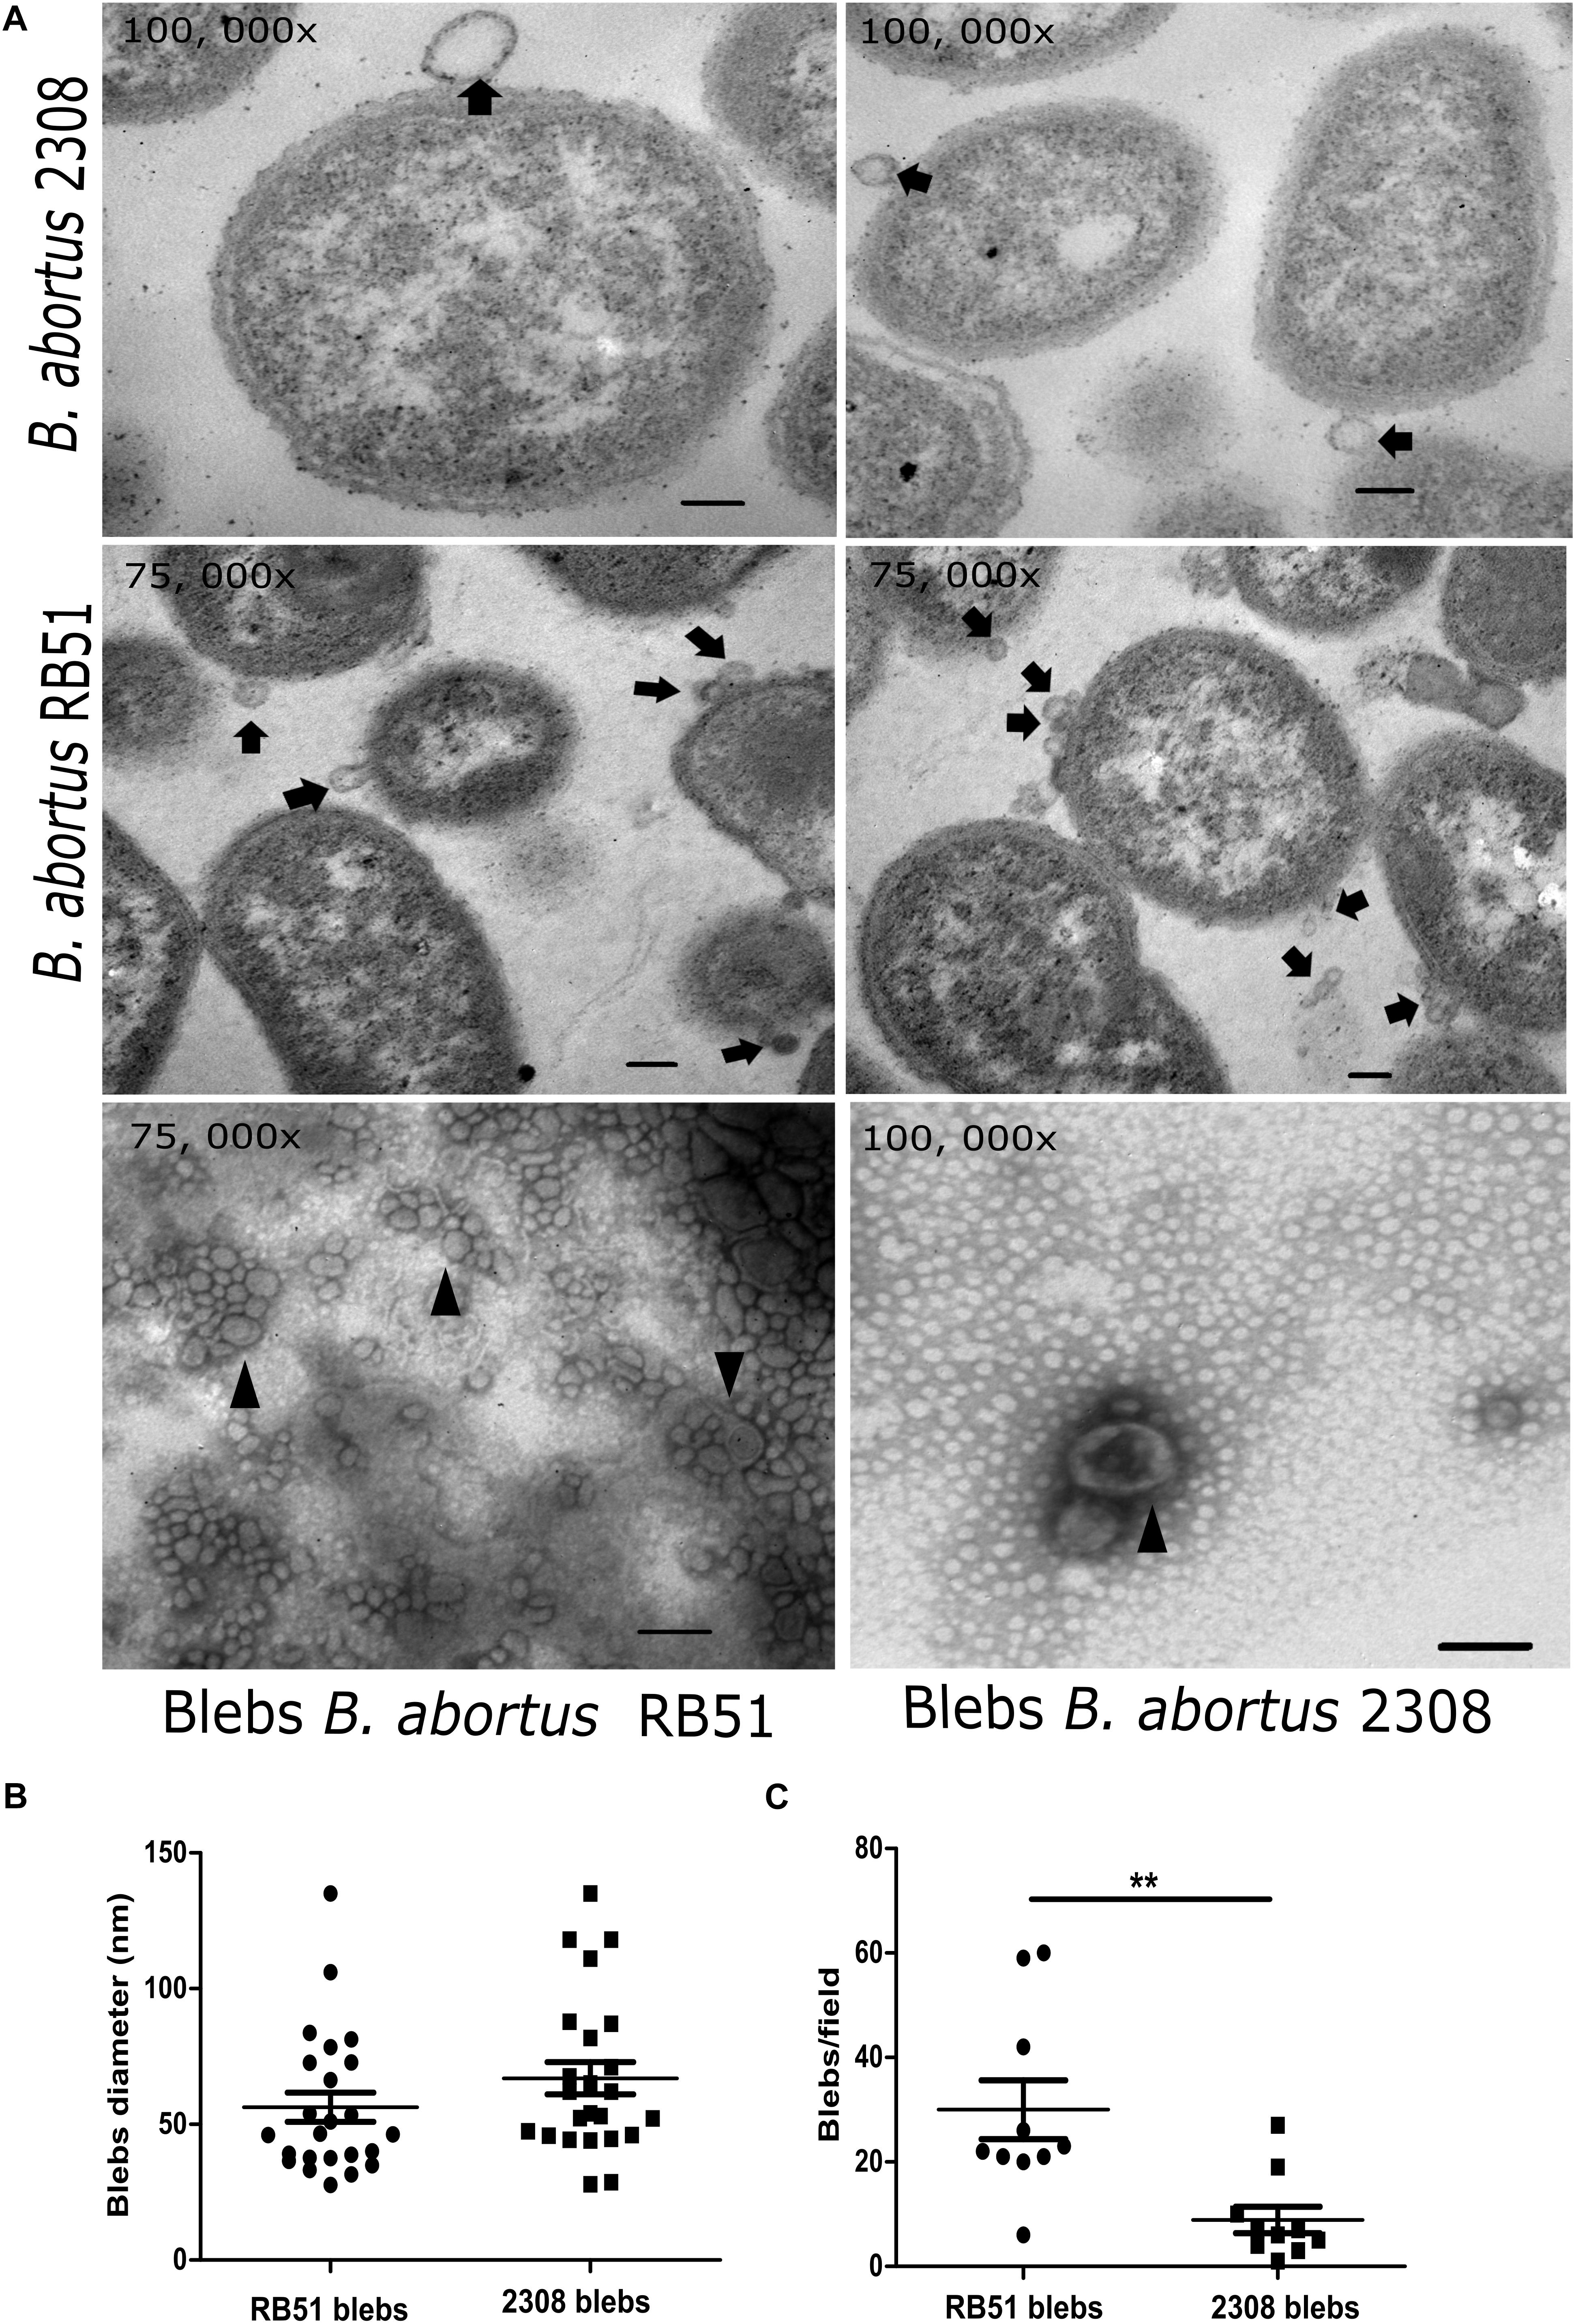 Afbestille broderi Match Frontiers | Proteomic Analysis of Membrane Blebs of Brucella abortus 2308  and RB51 and Their Evaluation as an Acellular Vaccine | Microbiology